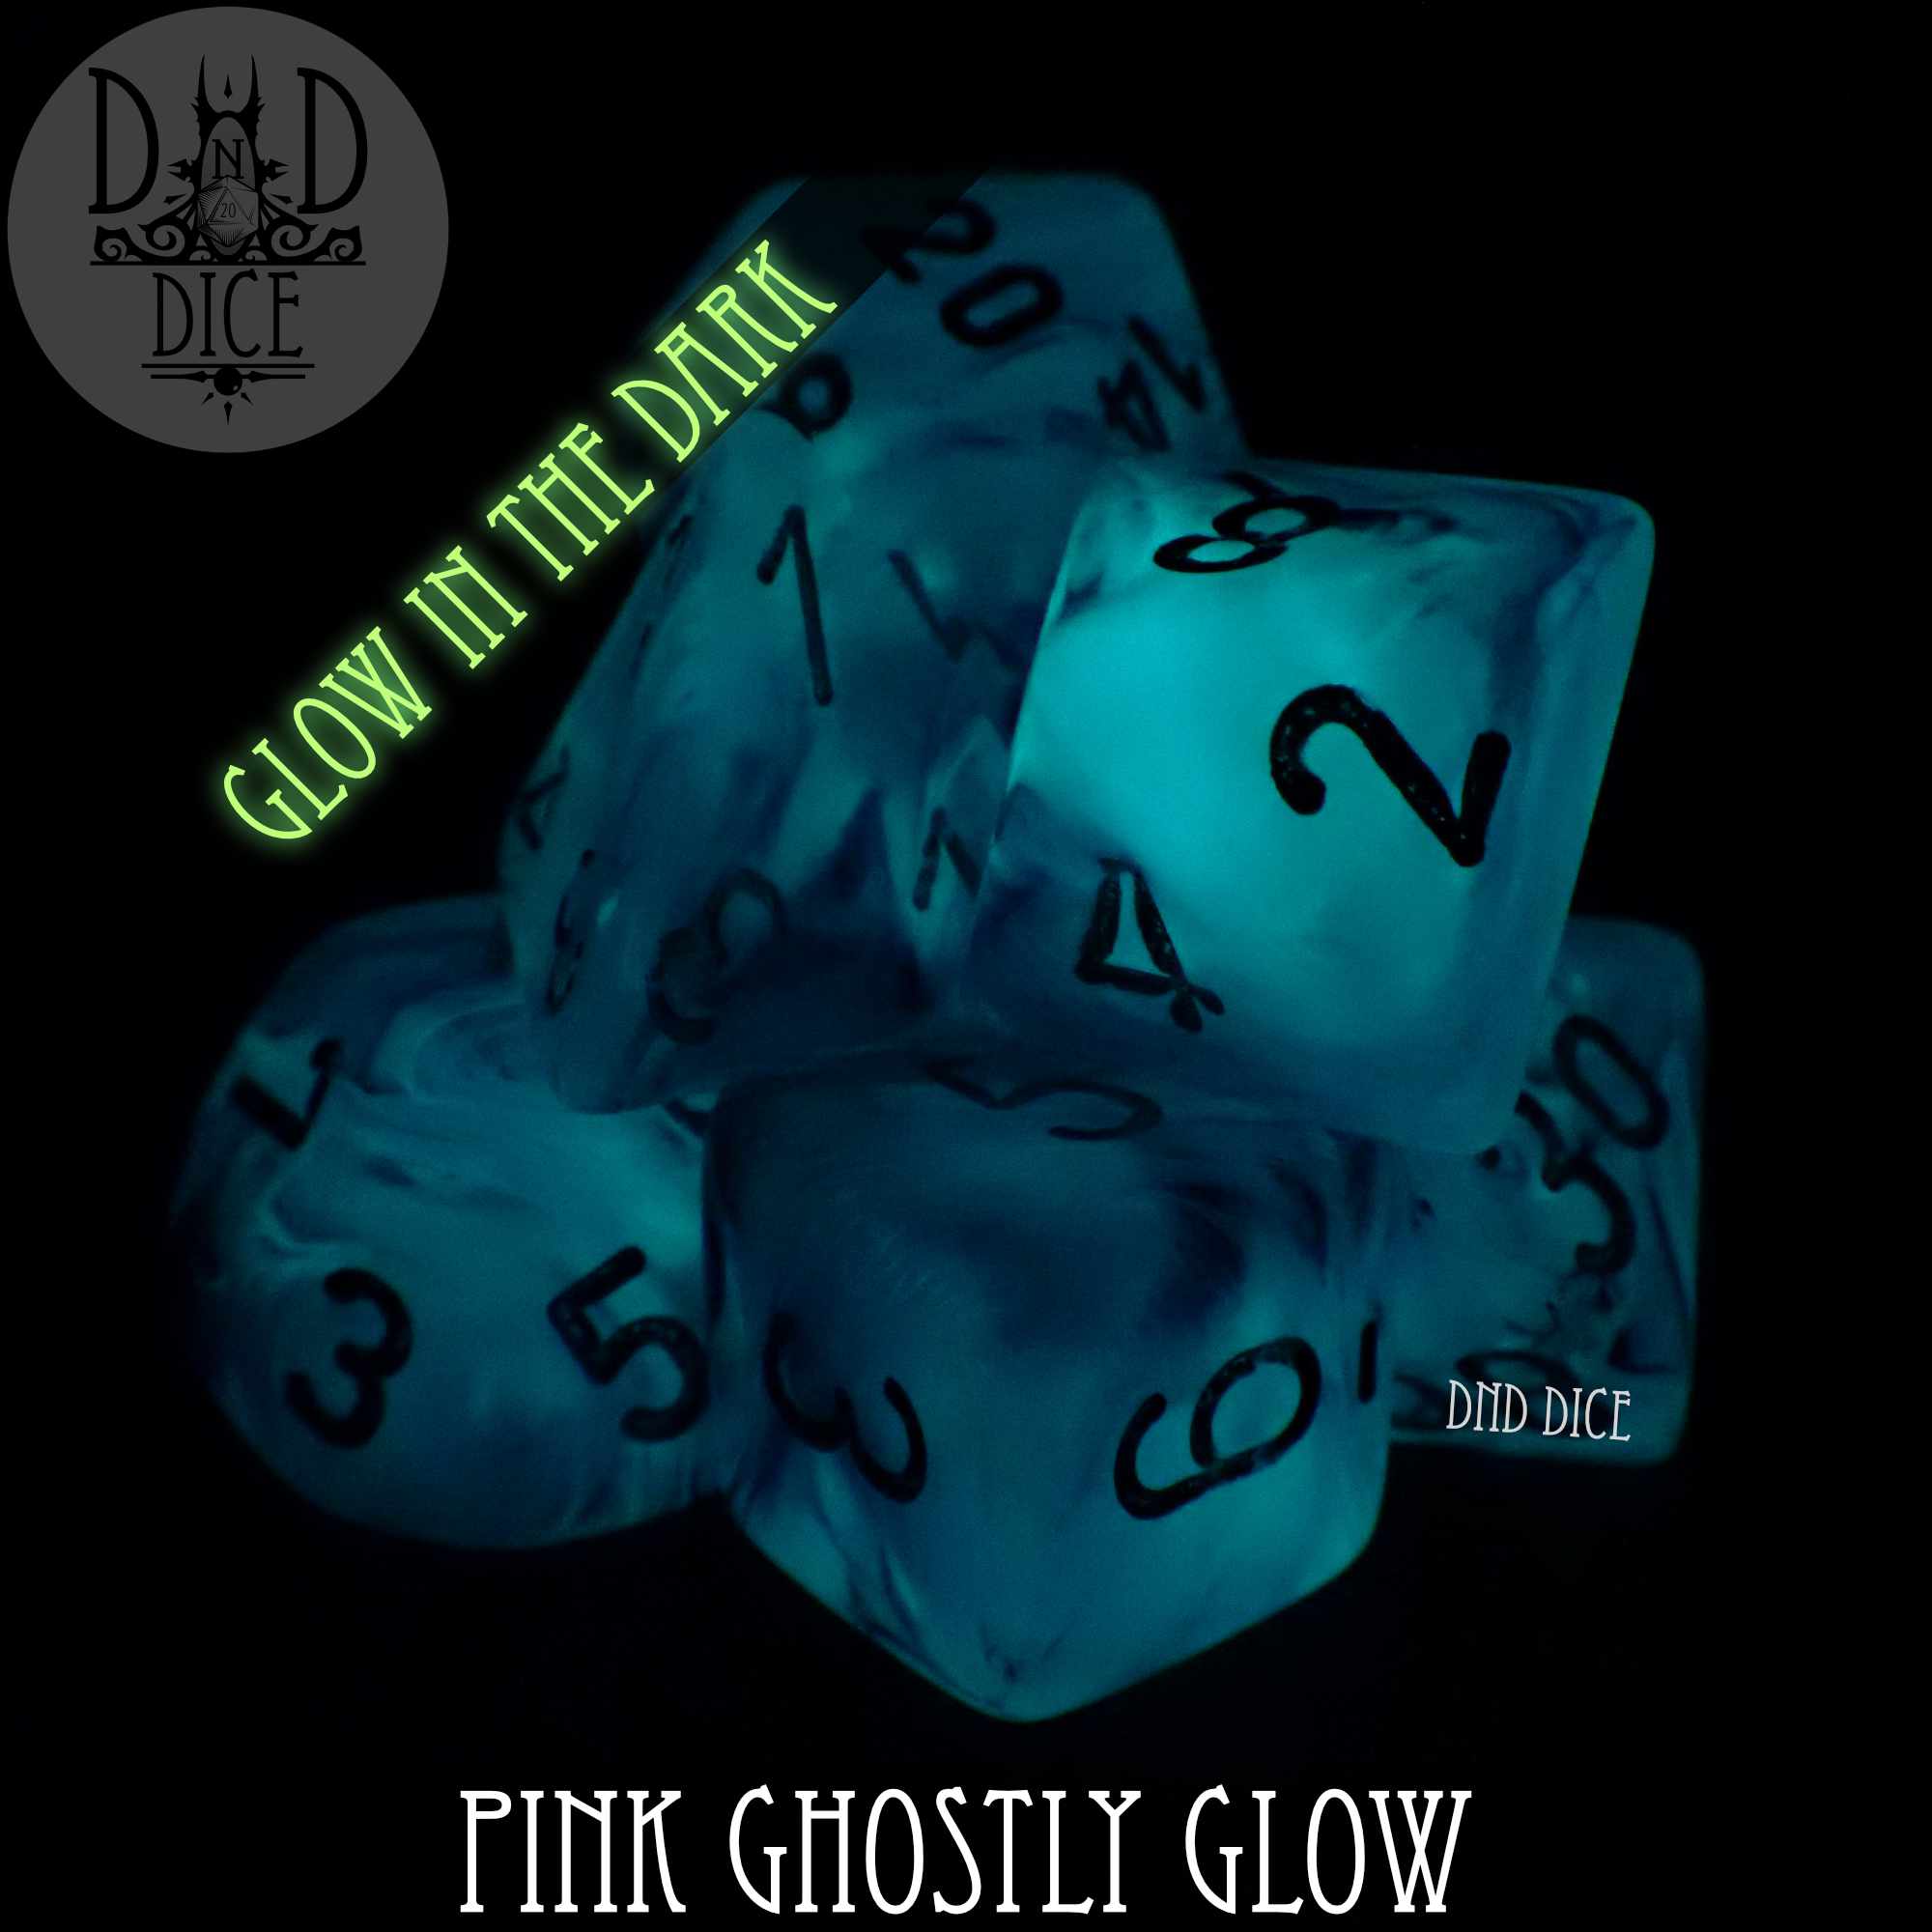 Pink Ghostly Glow Dice Set